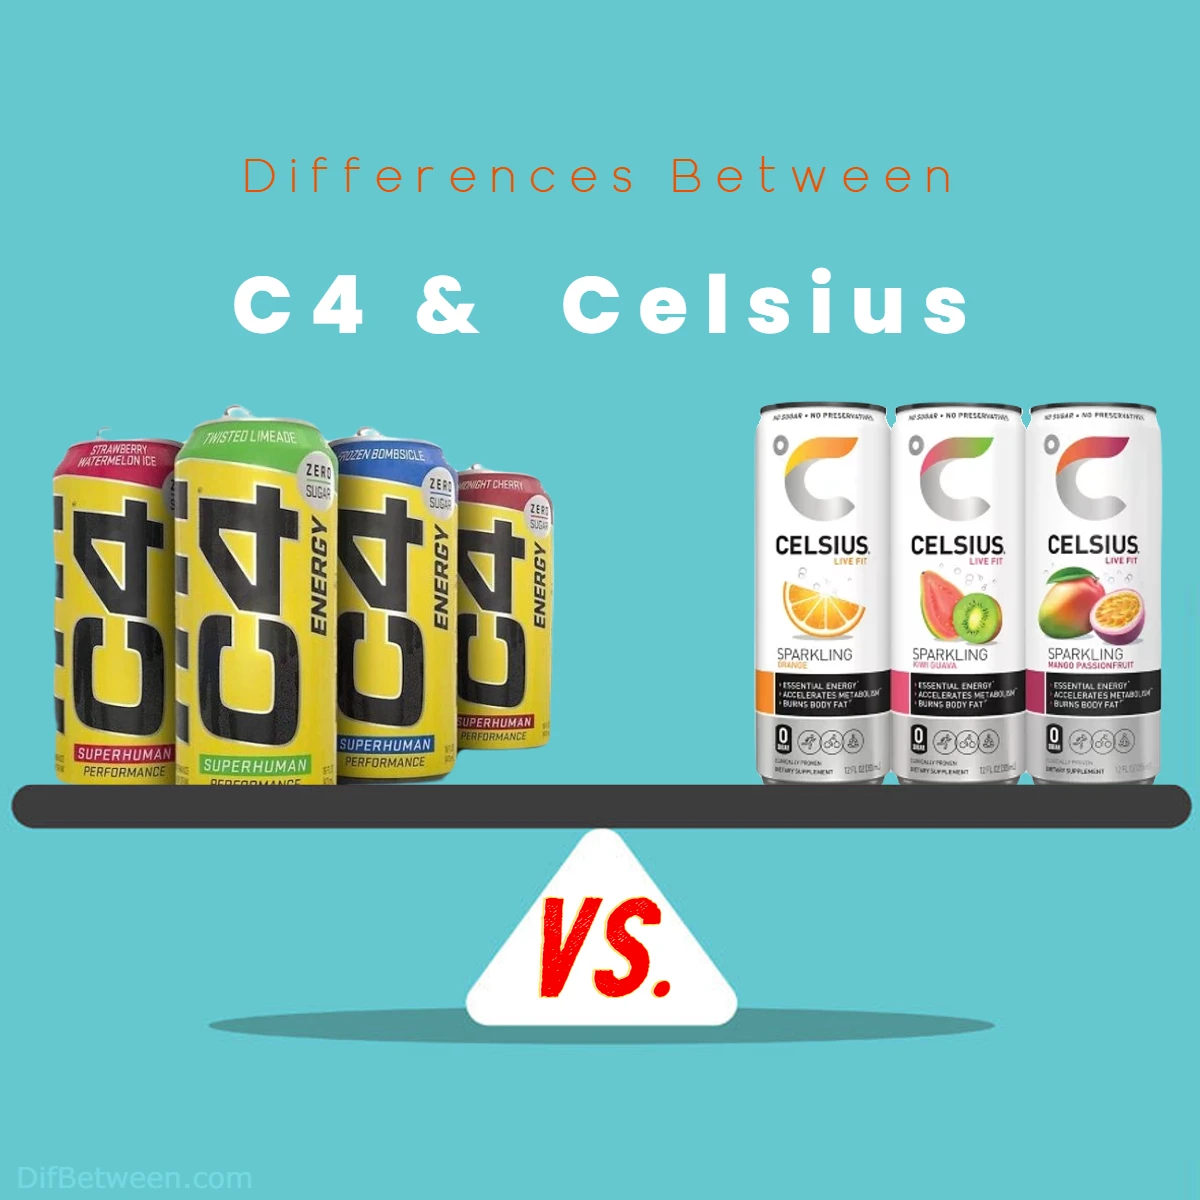 Differences Between Celsius and C4